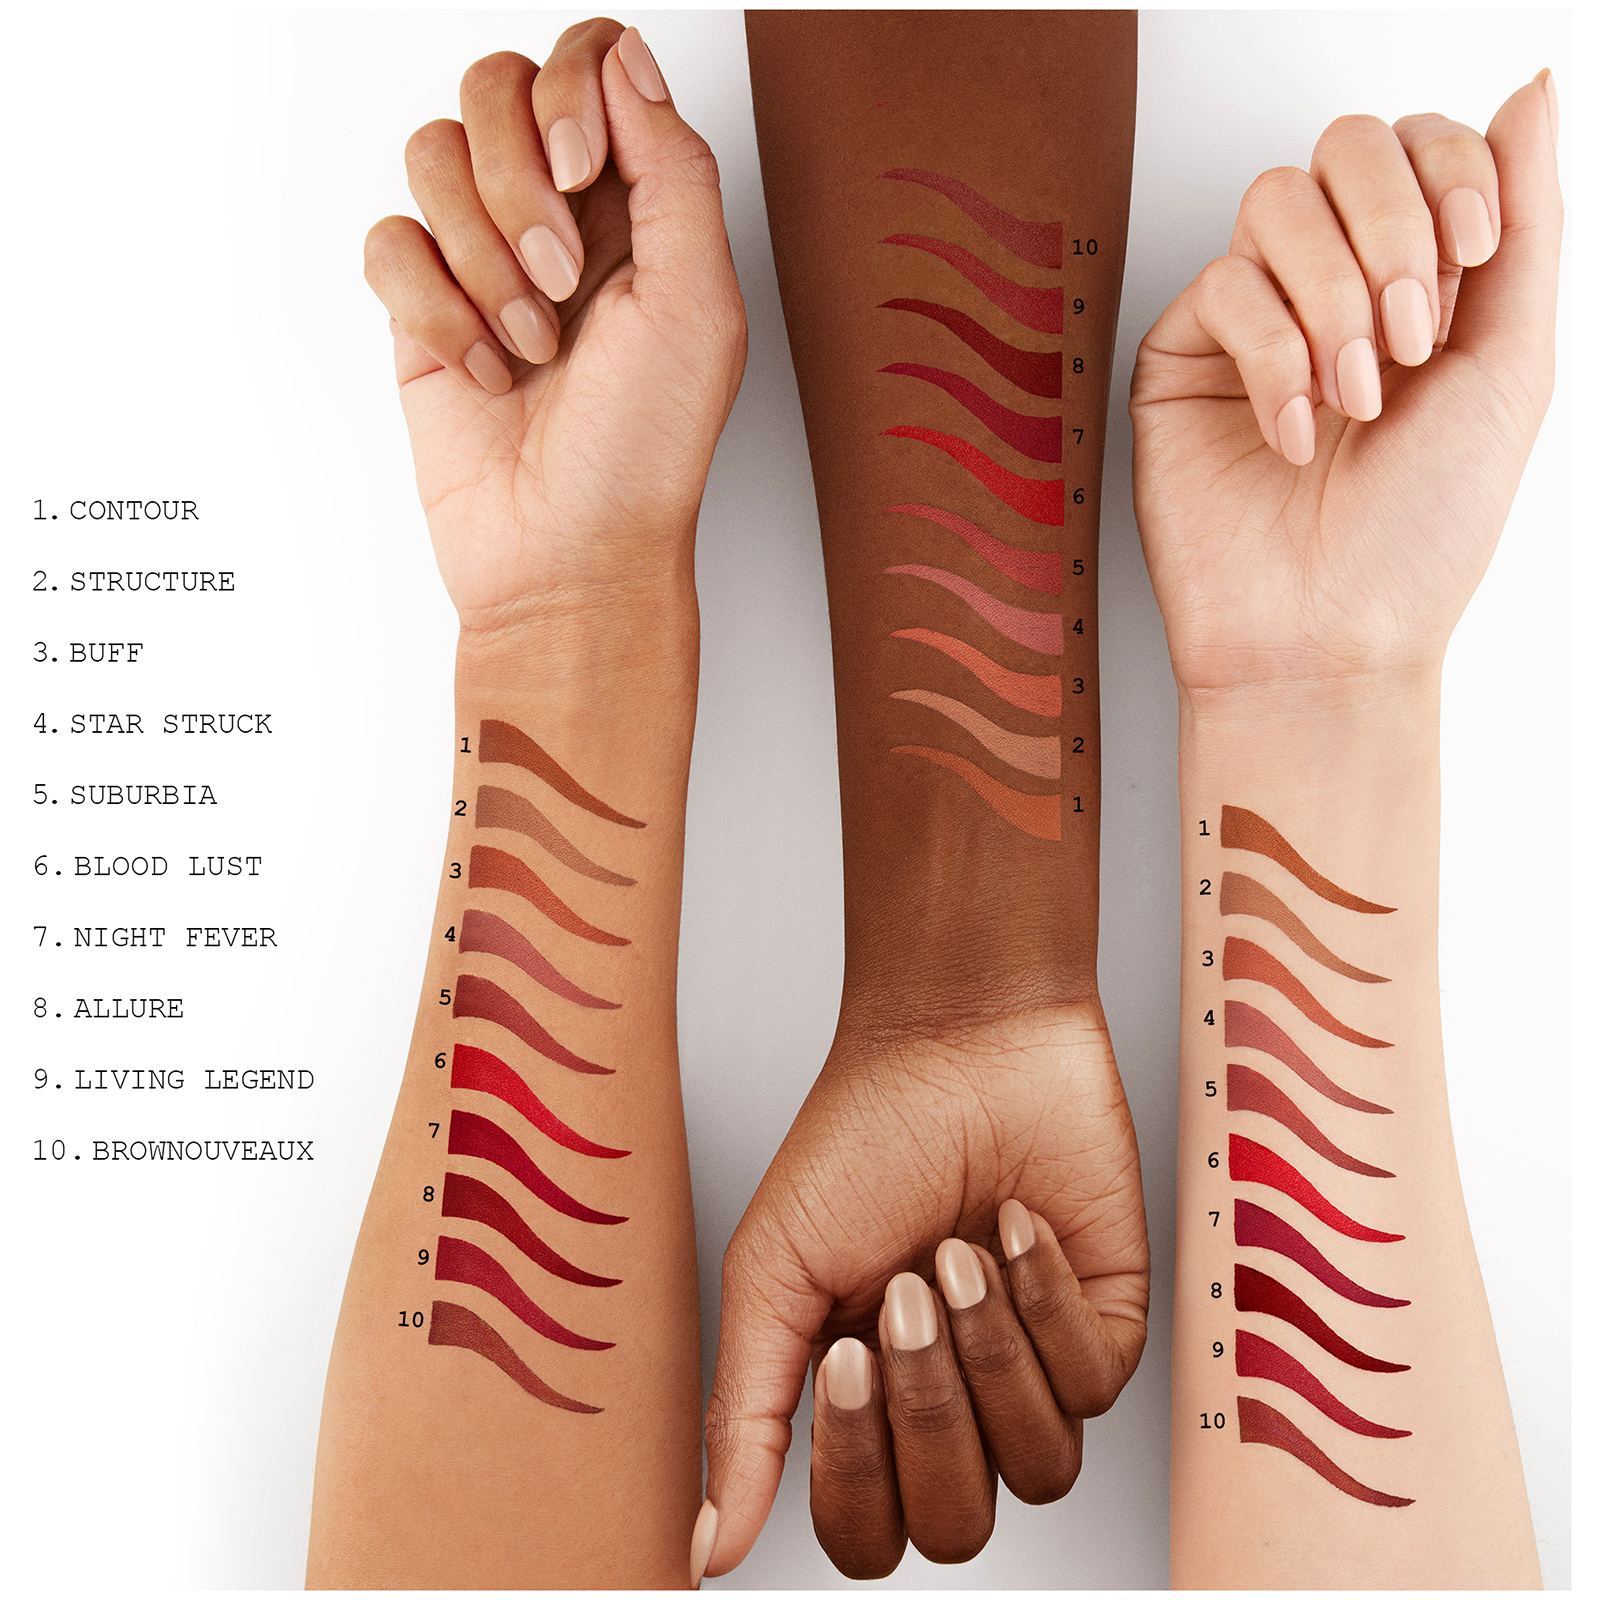 Image showing swatches of the shades modelled across three different skin tones: Contour, Structure, Buff, Star Struck, Suburbia, Blood Lust, Night Fever, Allure, Living Legend, Brownnouveaux